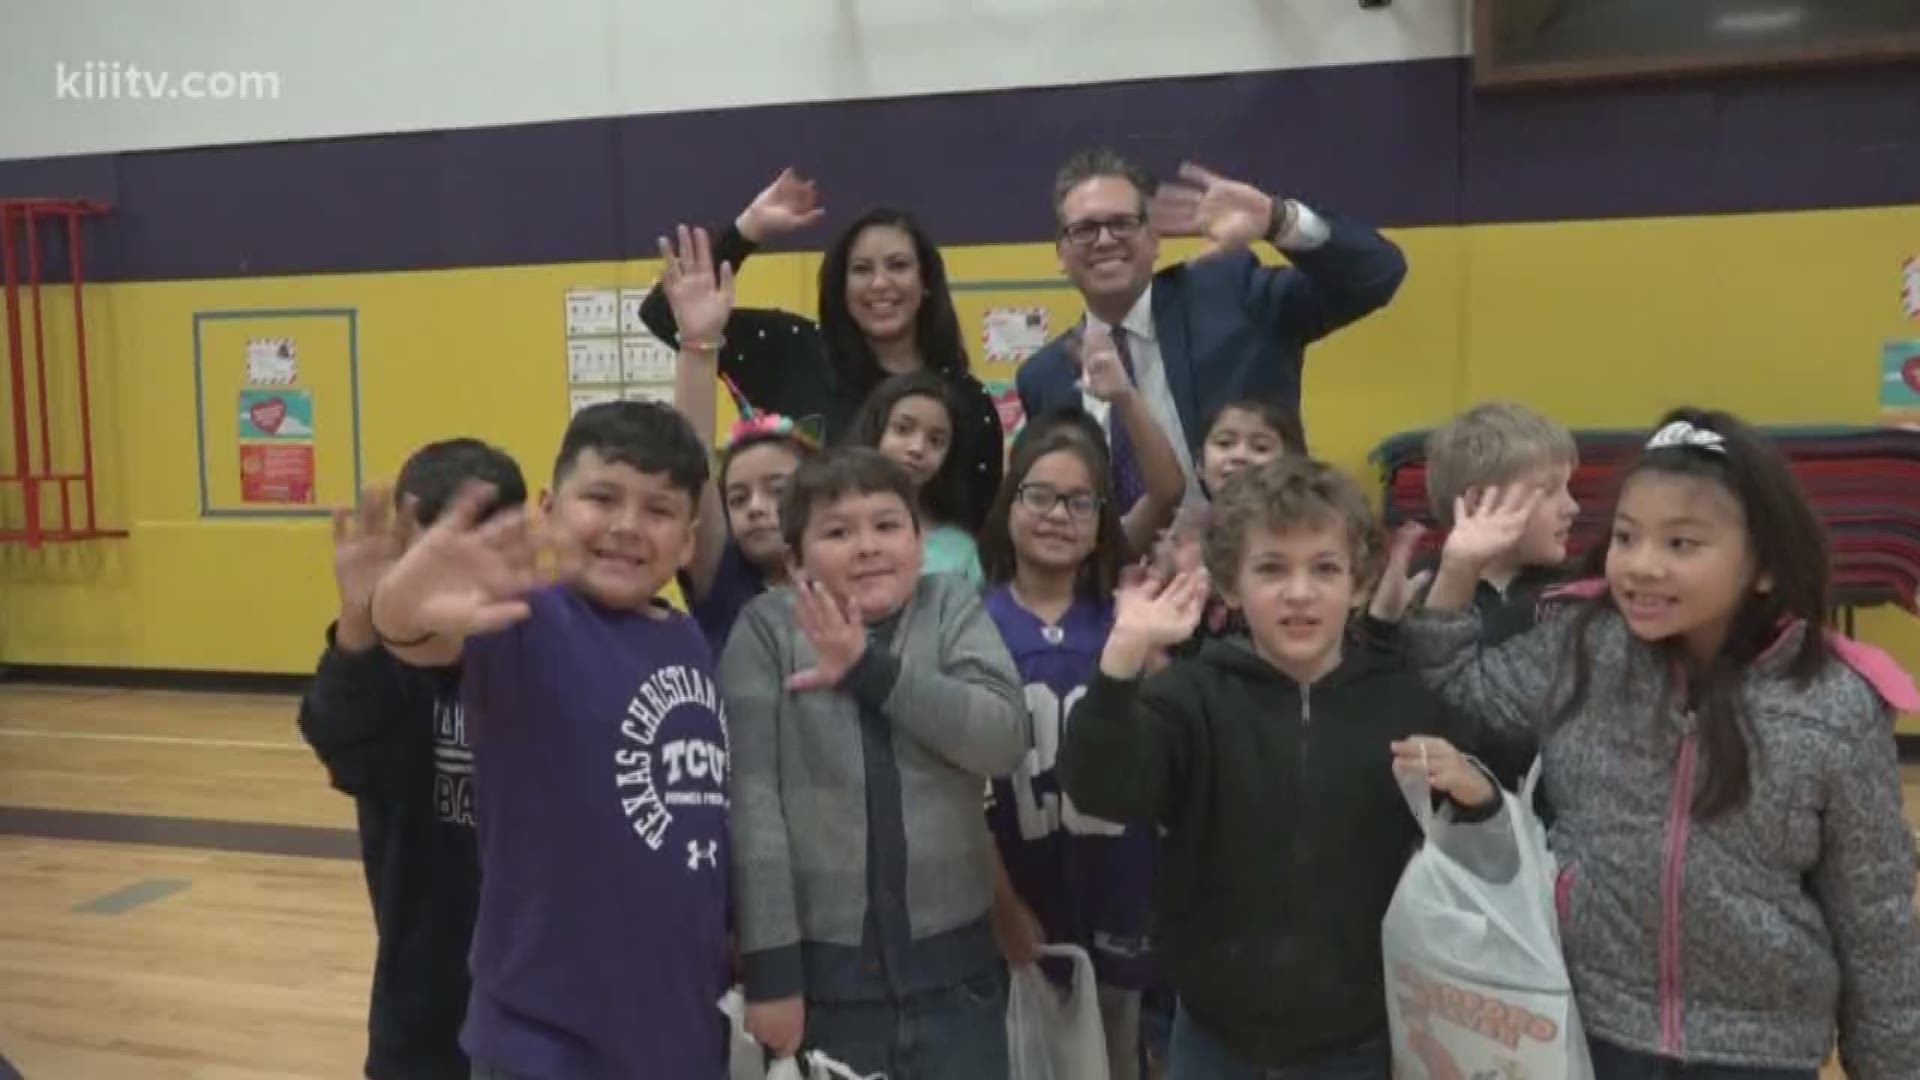 Some familiar faces made an appearance Thursday morning at Metro Elementary School.

Kiii News Anchors John-Thomas Kobos and Kristin Diaz visited the school to speak to students for their Career Day.